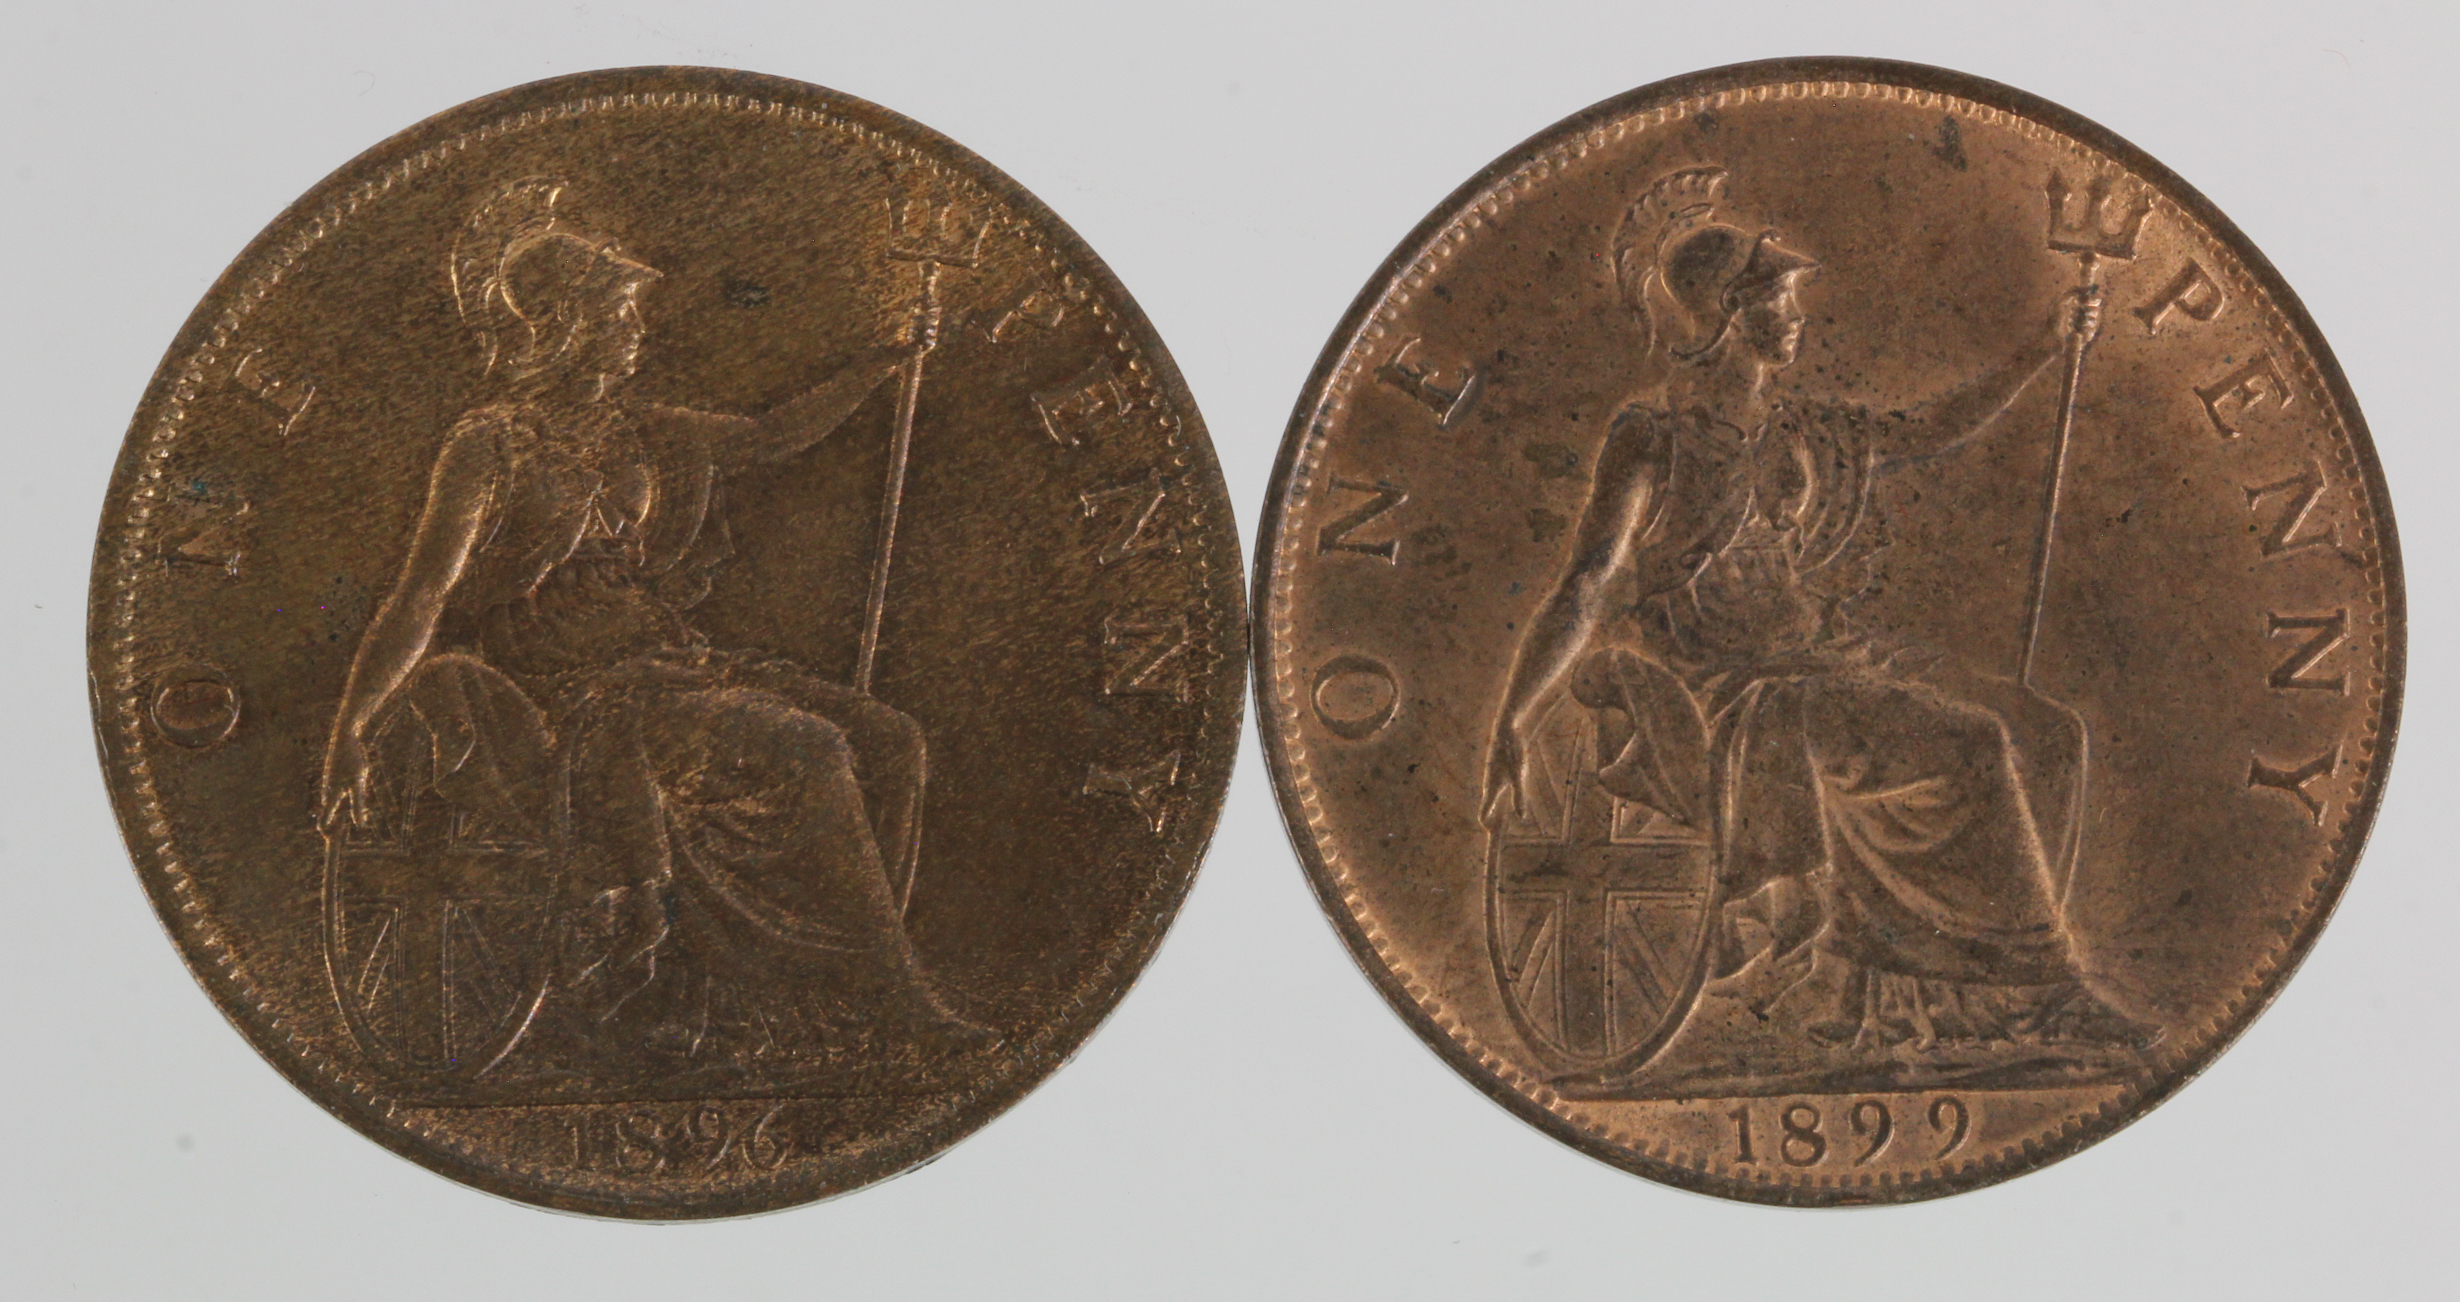 Pennies (2) Queen Victoria veiled hd: 1896 and 1899, GEF-AU with lustre - Image 2 of 2